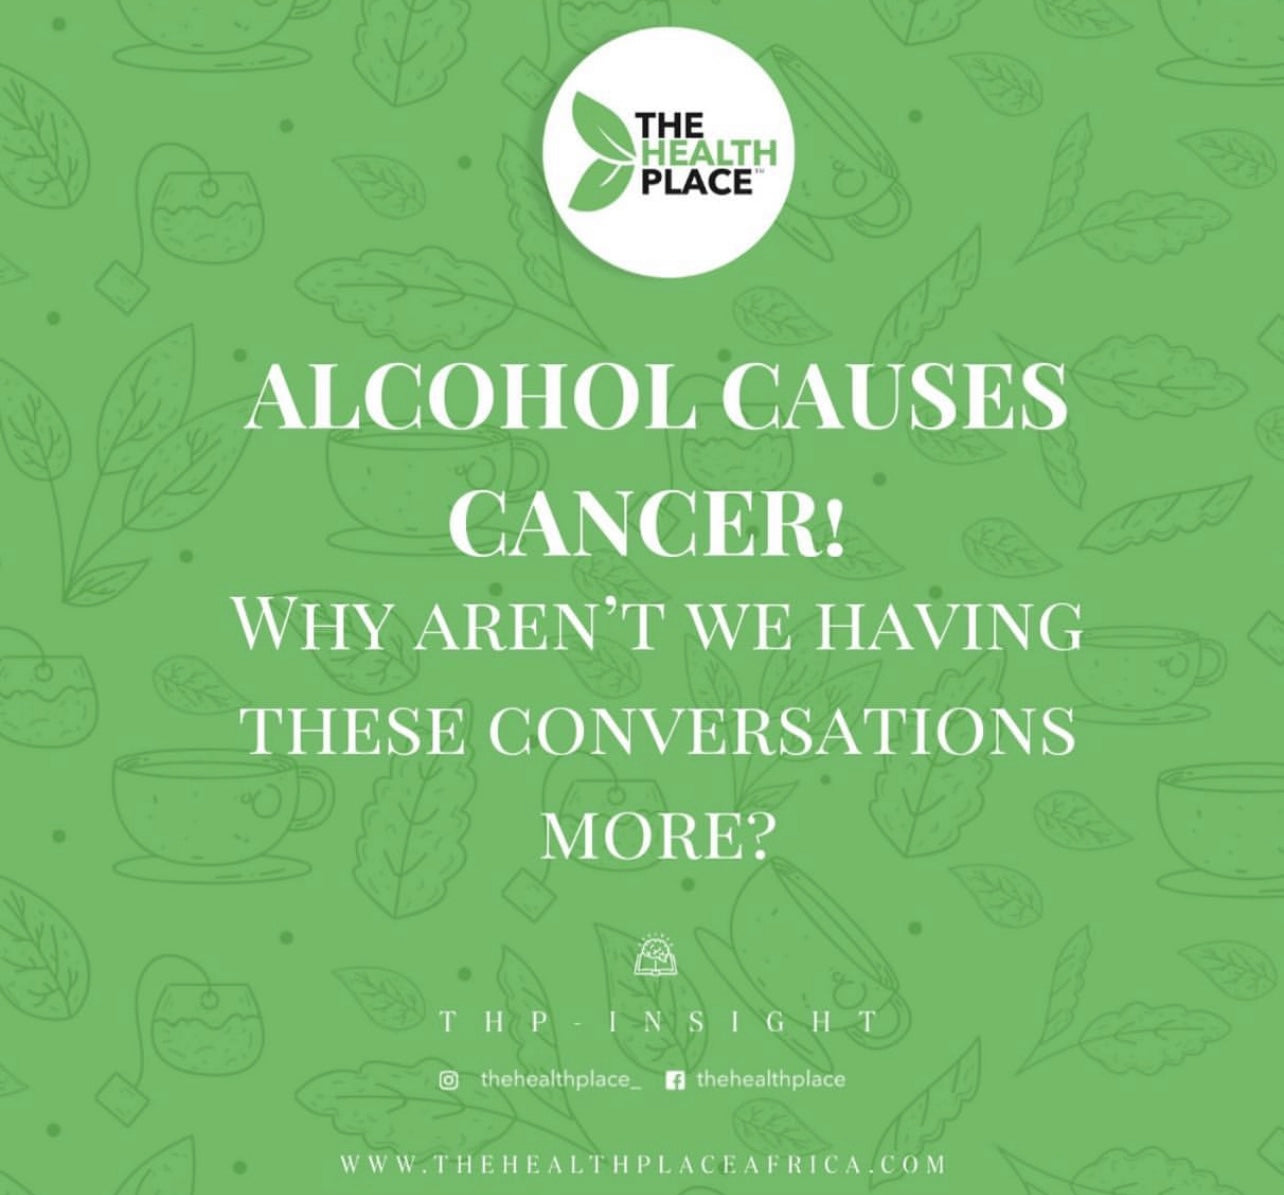 ALCOHOL CAUSES CANCER- WHY AREN'T WE HAVING THESE CONVERSATIONS MORE?